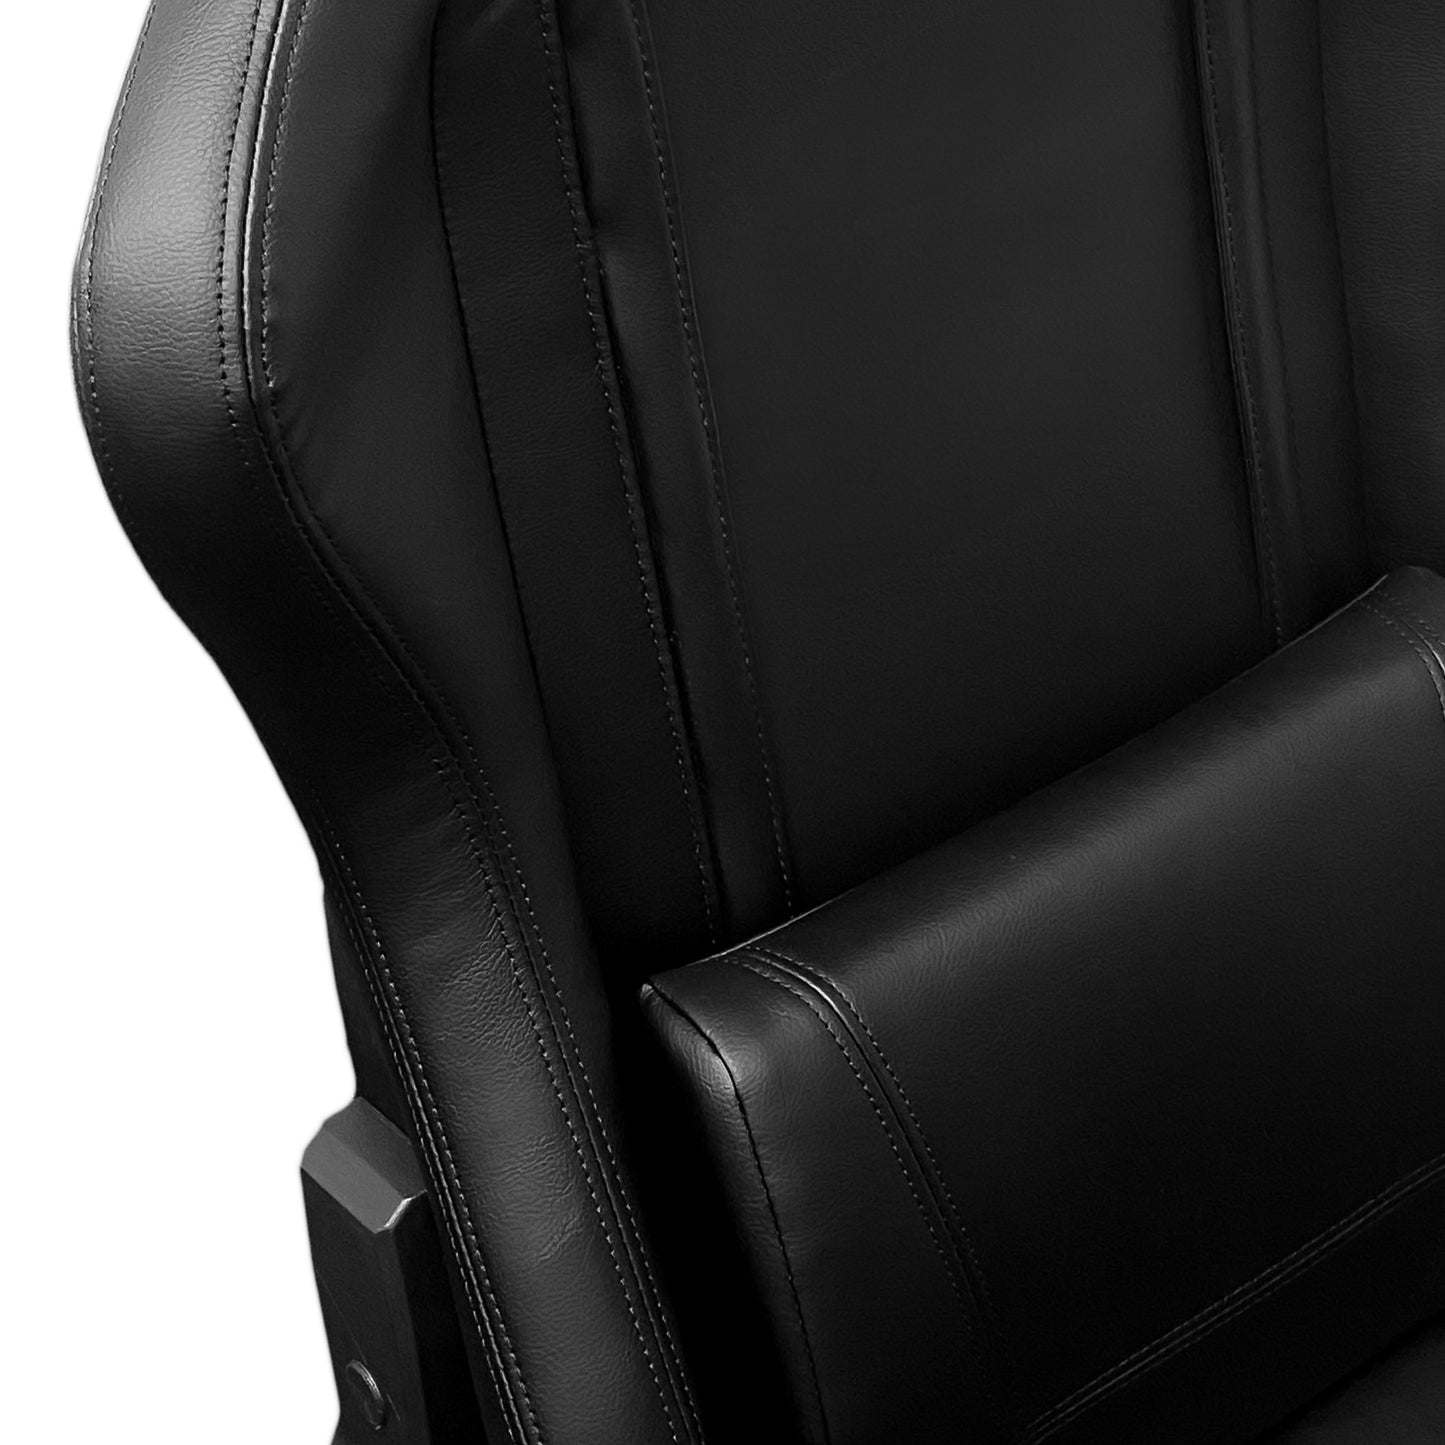 Xpression Pro Gaming Chair with Brooklyn Nets Logo